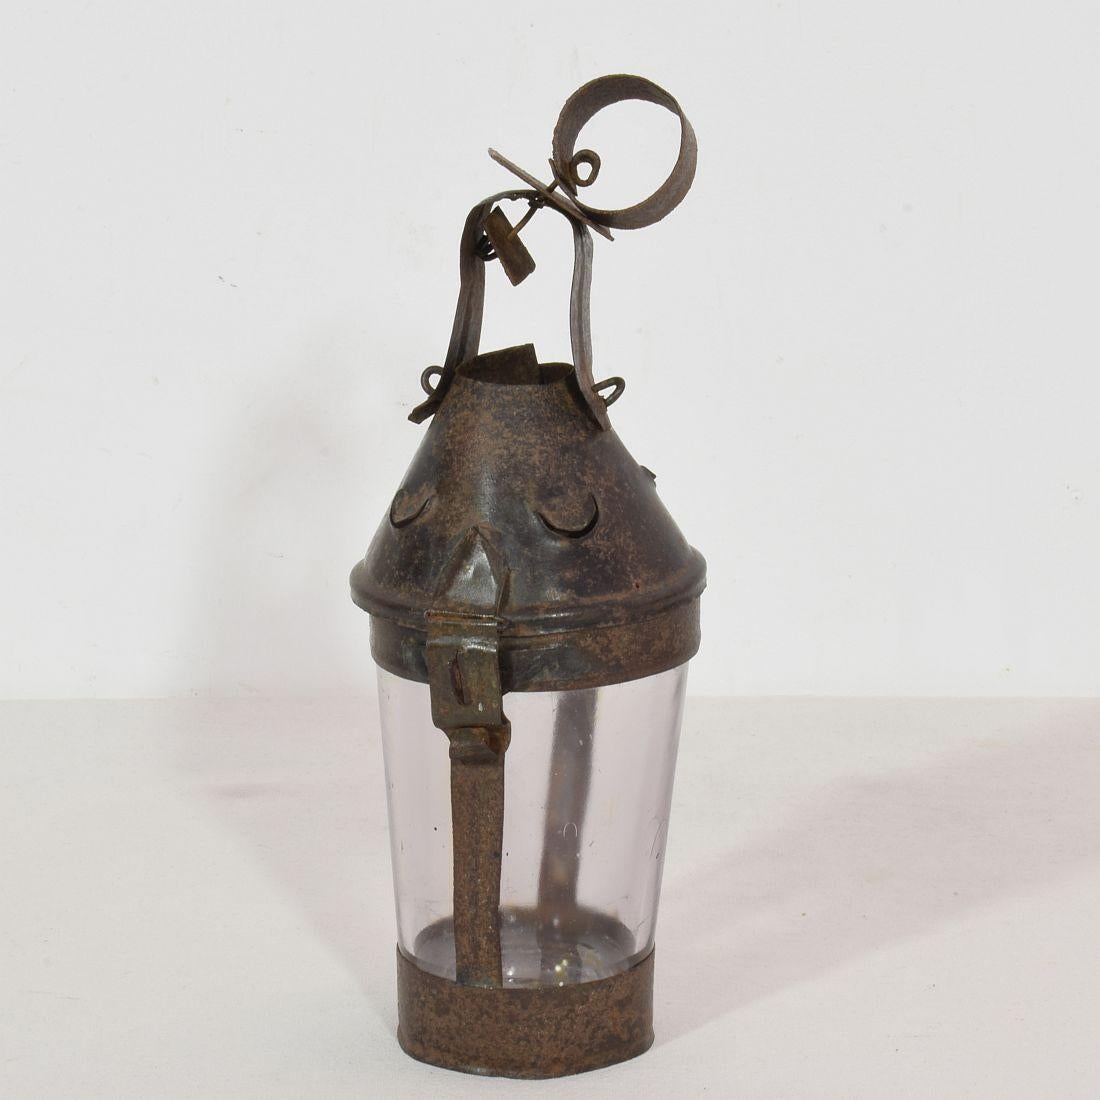 Very rare small folk art lantern, France, circa 1850-1900.
Made from a part of a glass Evian water bottle and iron.
Beautiful weathered.